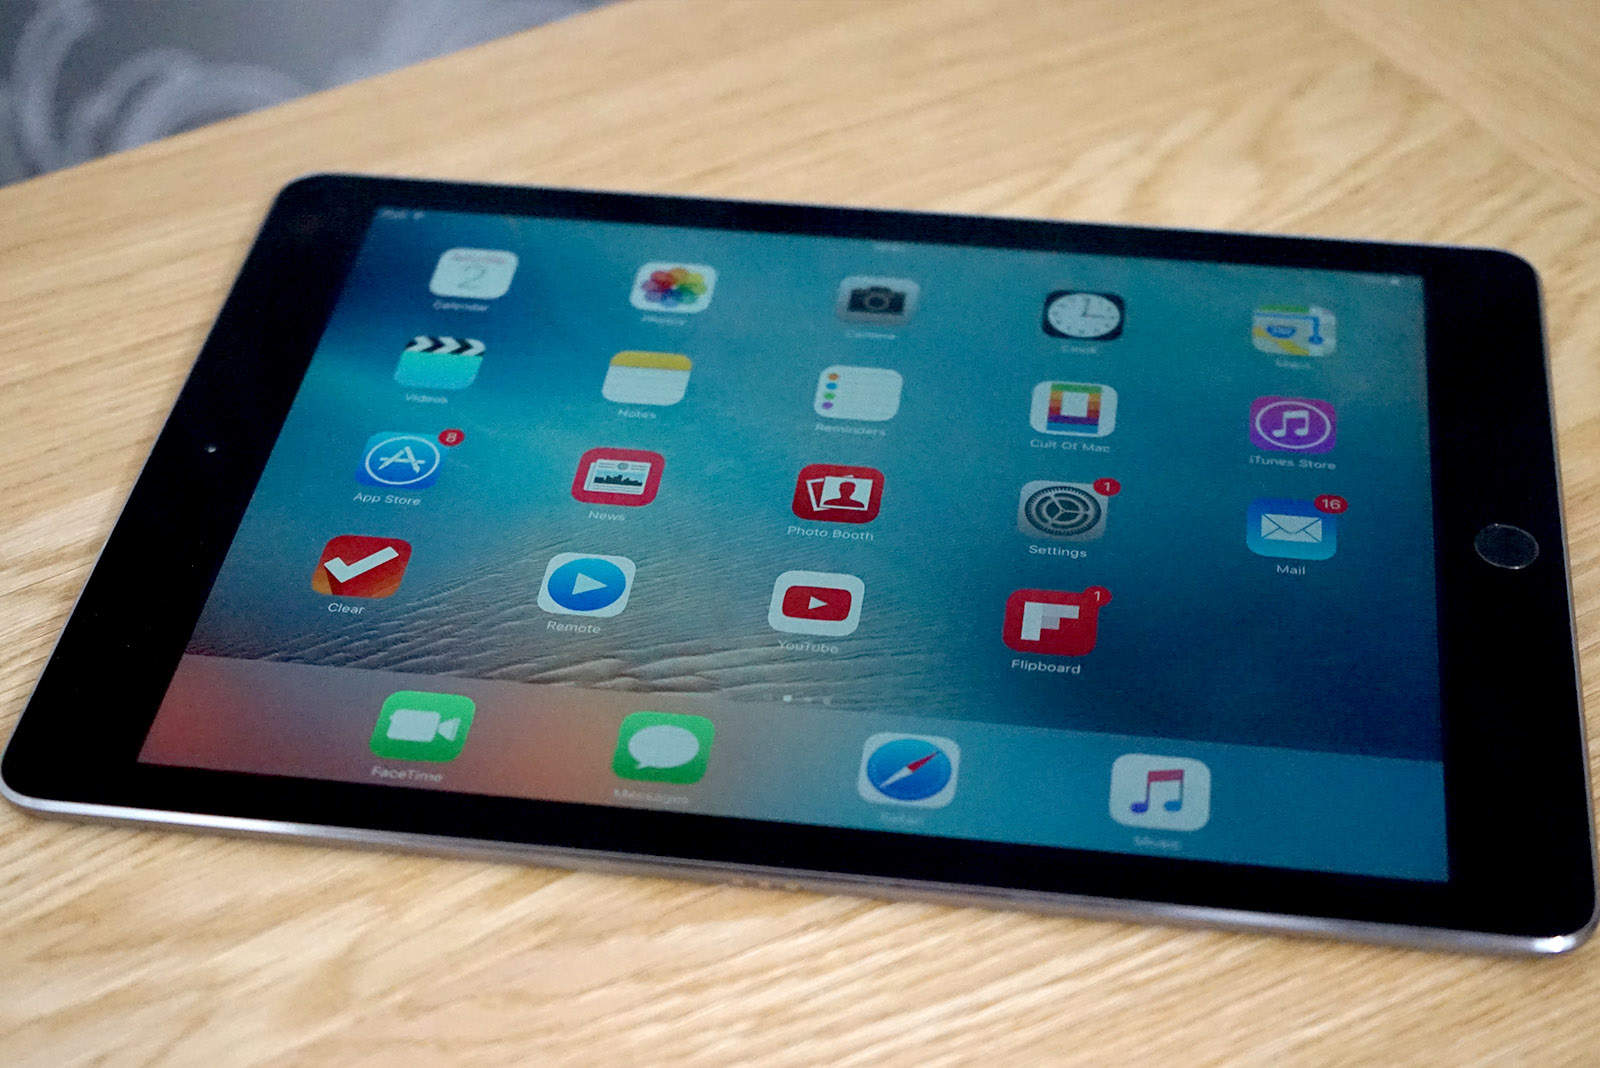 The new iPad Pro could have an even greater display.